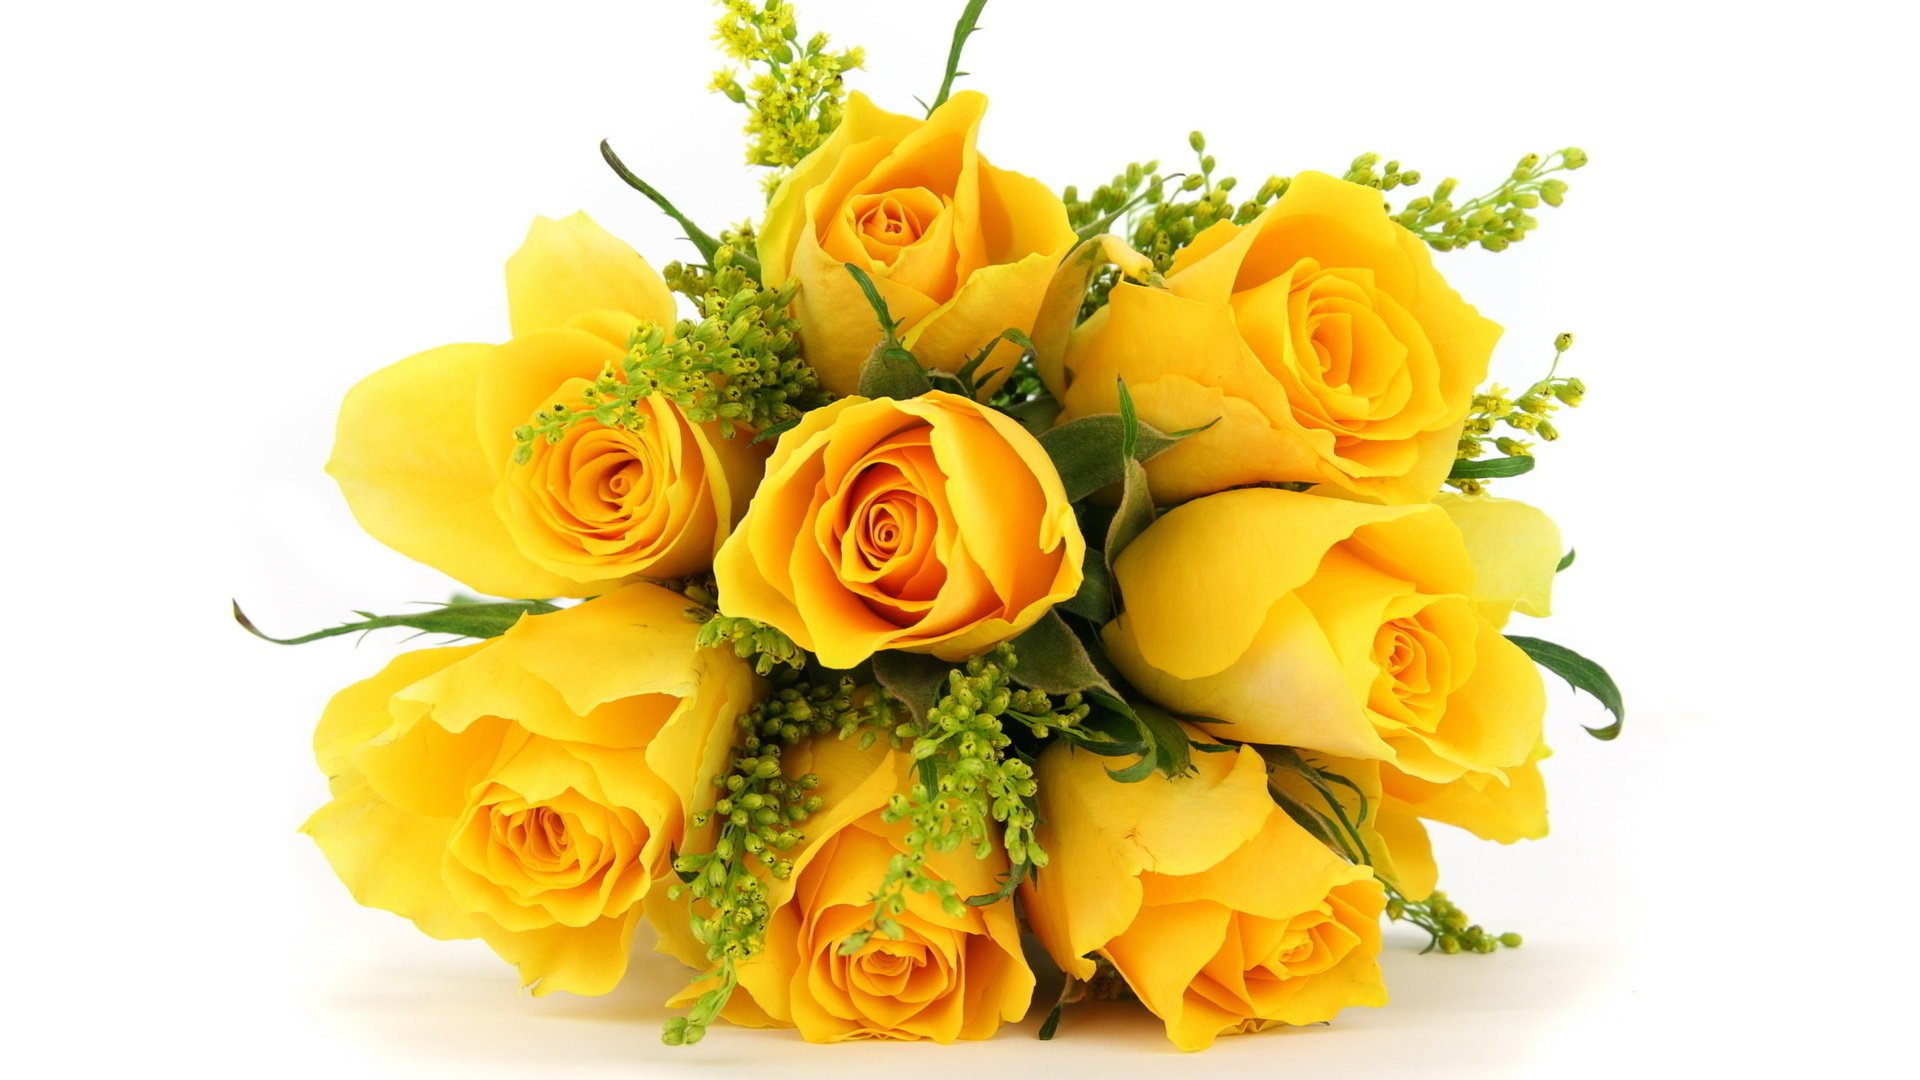 Beautiful bouquet of yellow roses and ornamental plants